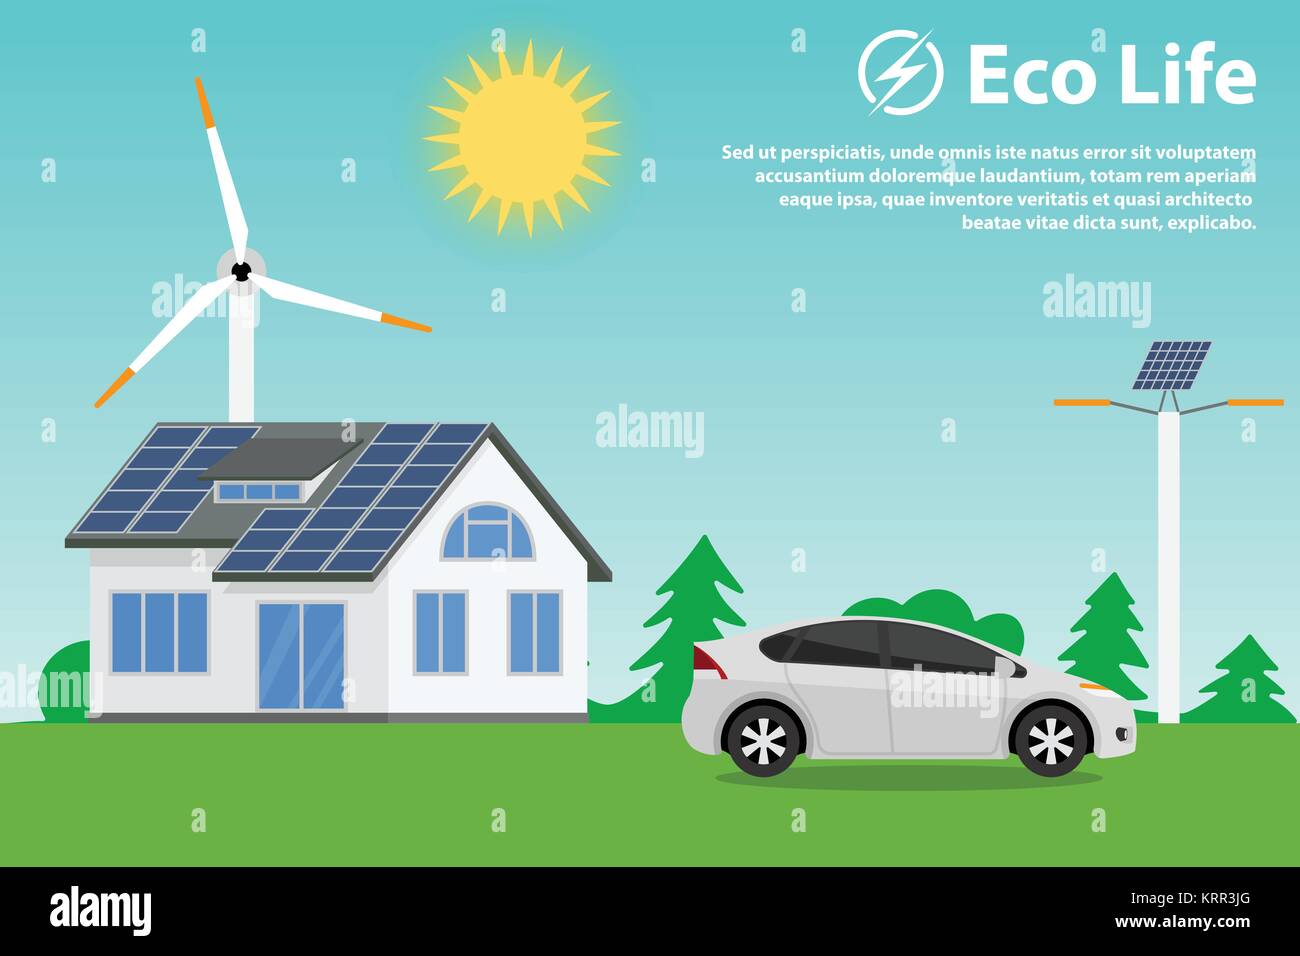 Preserving the environment and using renewable energy sources - solar and wind. Eco house, hybrid car and street lighting. Stock Vector